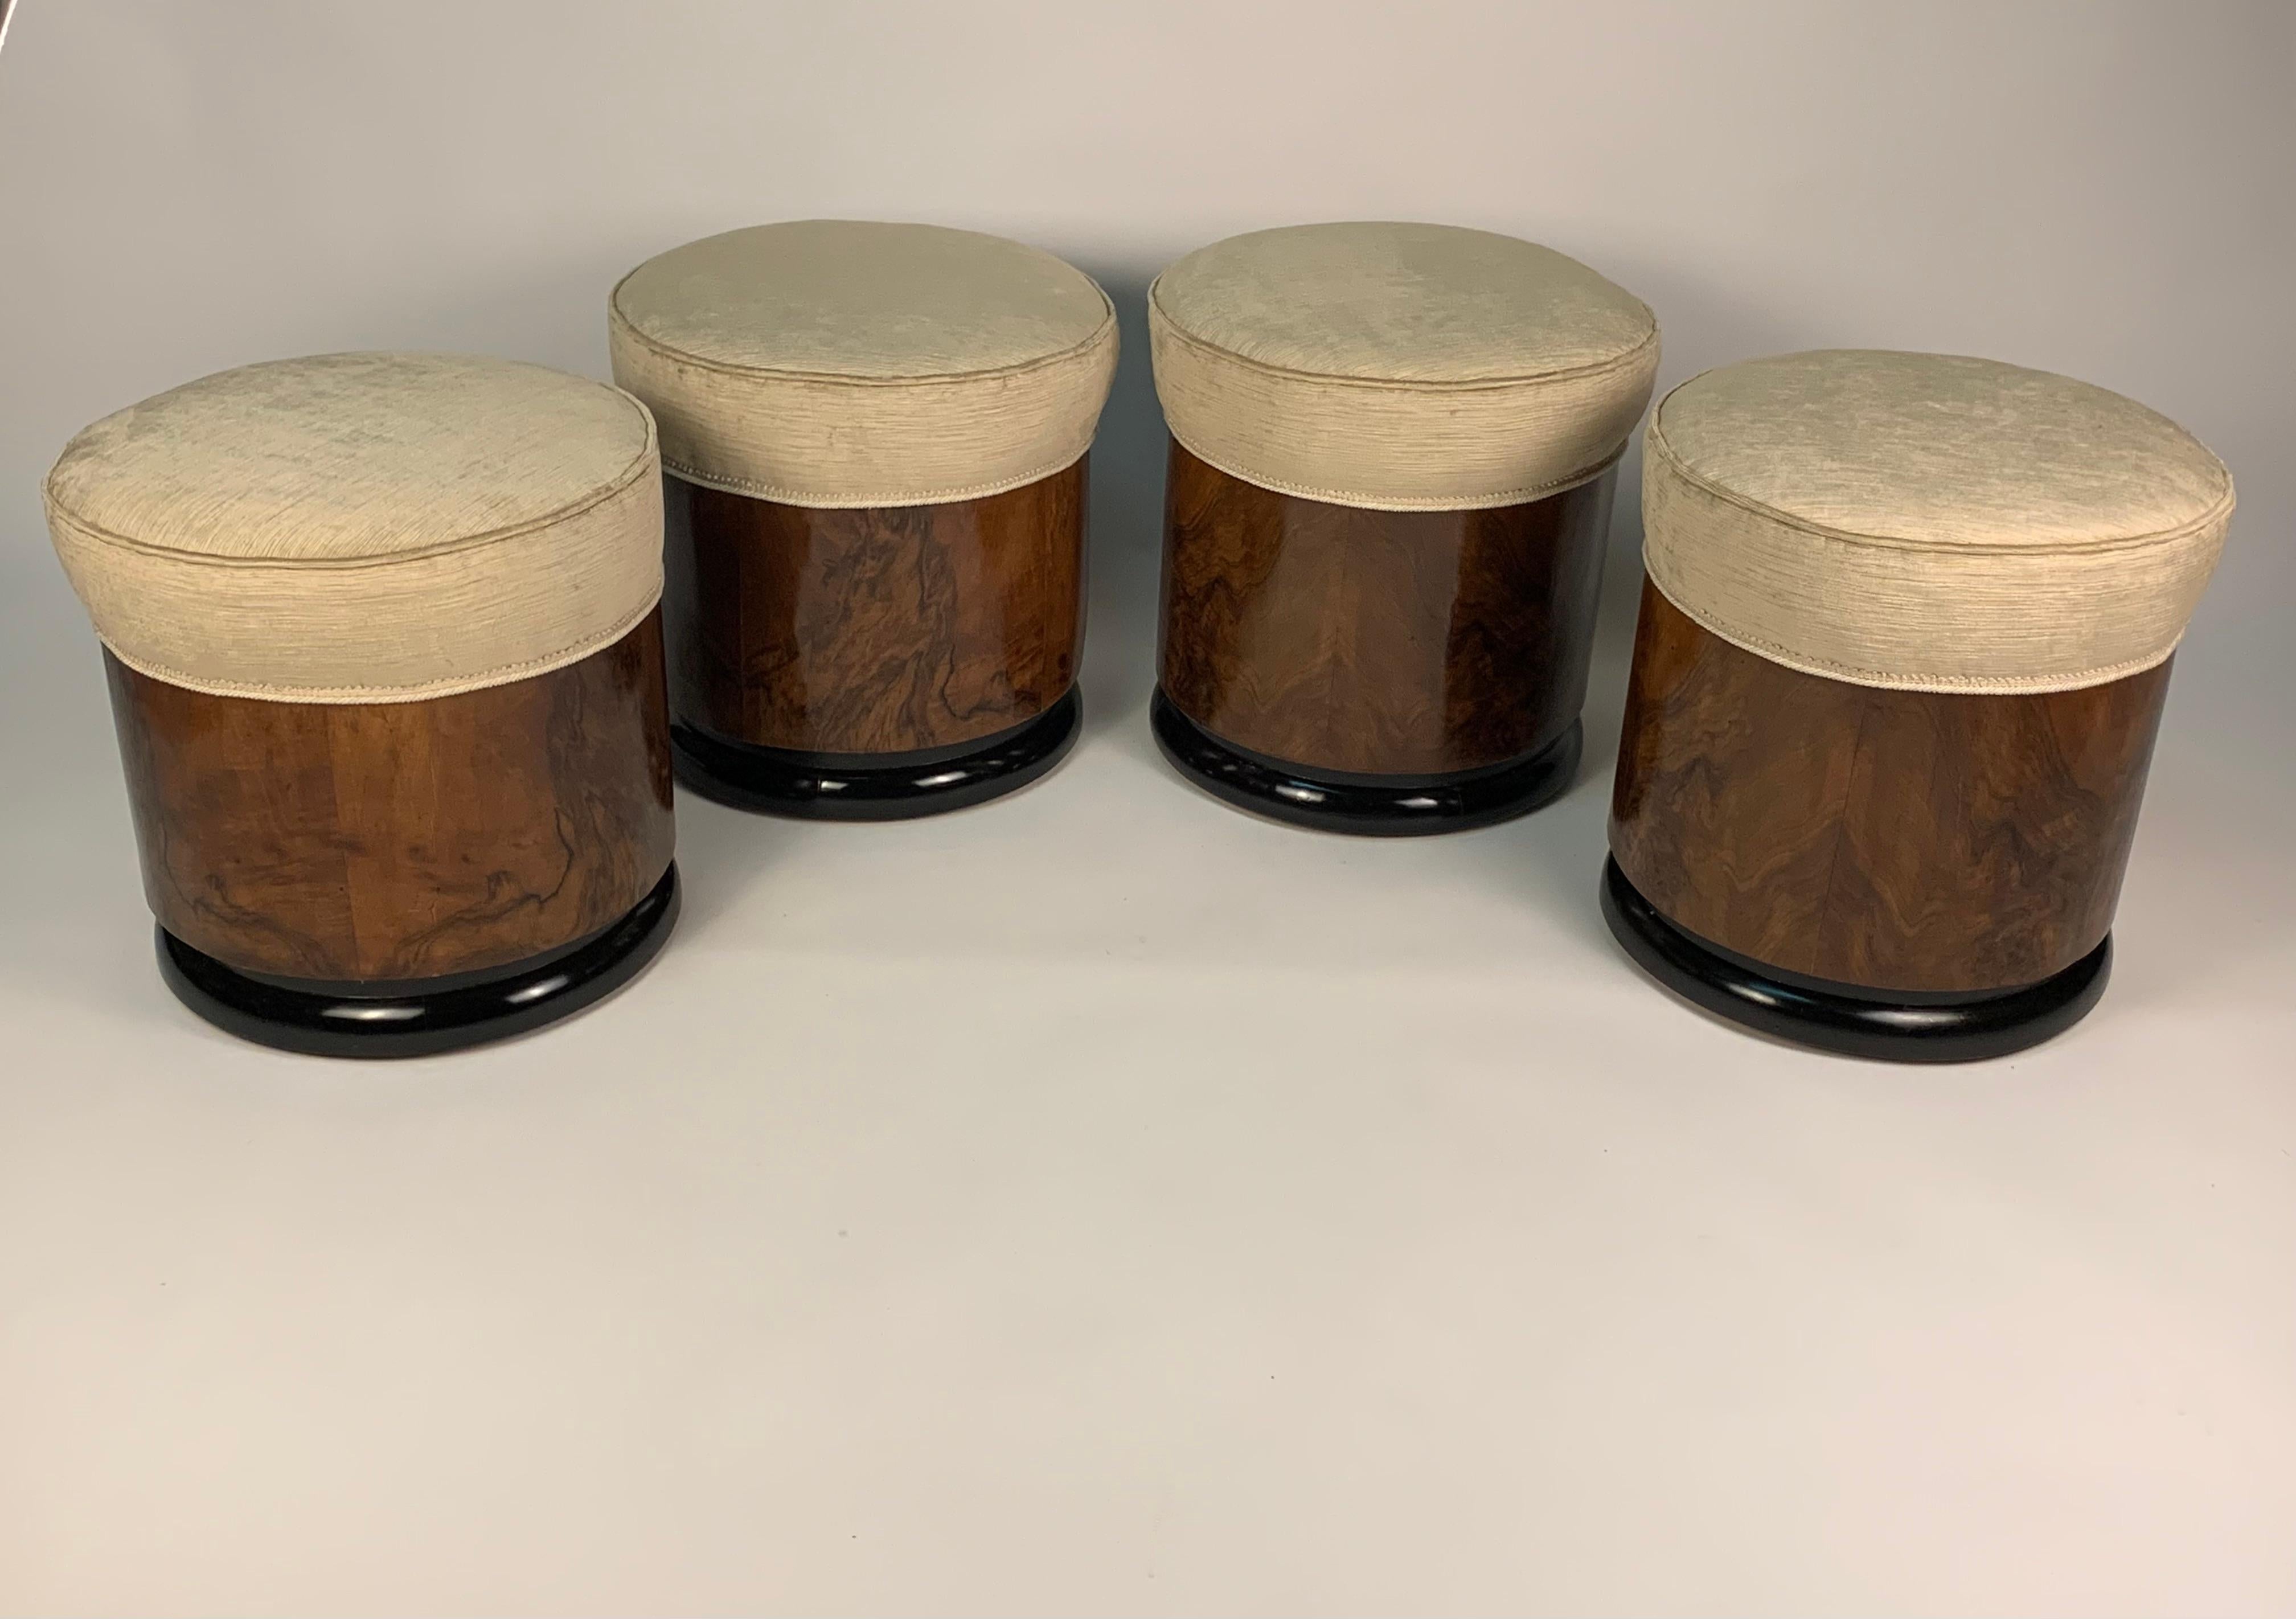 Four Italian Art Deco cylindrical stools with a rounded black lacquered base that frames the bottom and beautiful wood that covers the entire cylinder. The seat in the upper part is upholstered in velvet.
Made by the Meroni and Fossati Manufacture